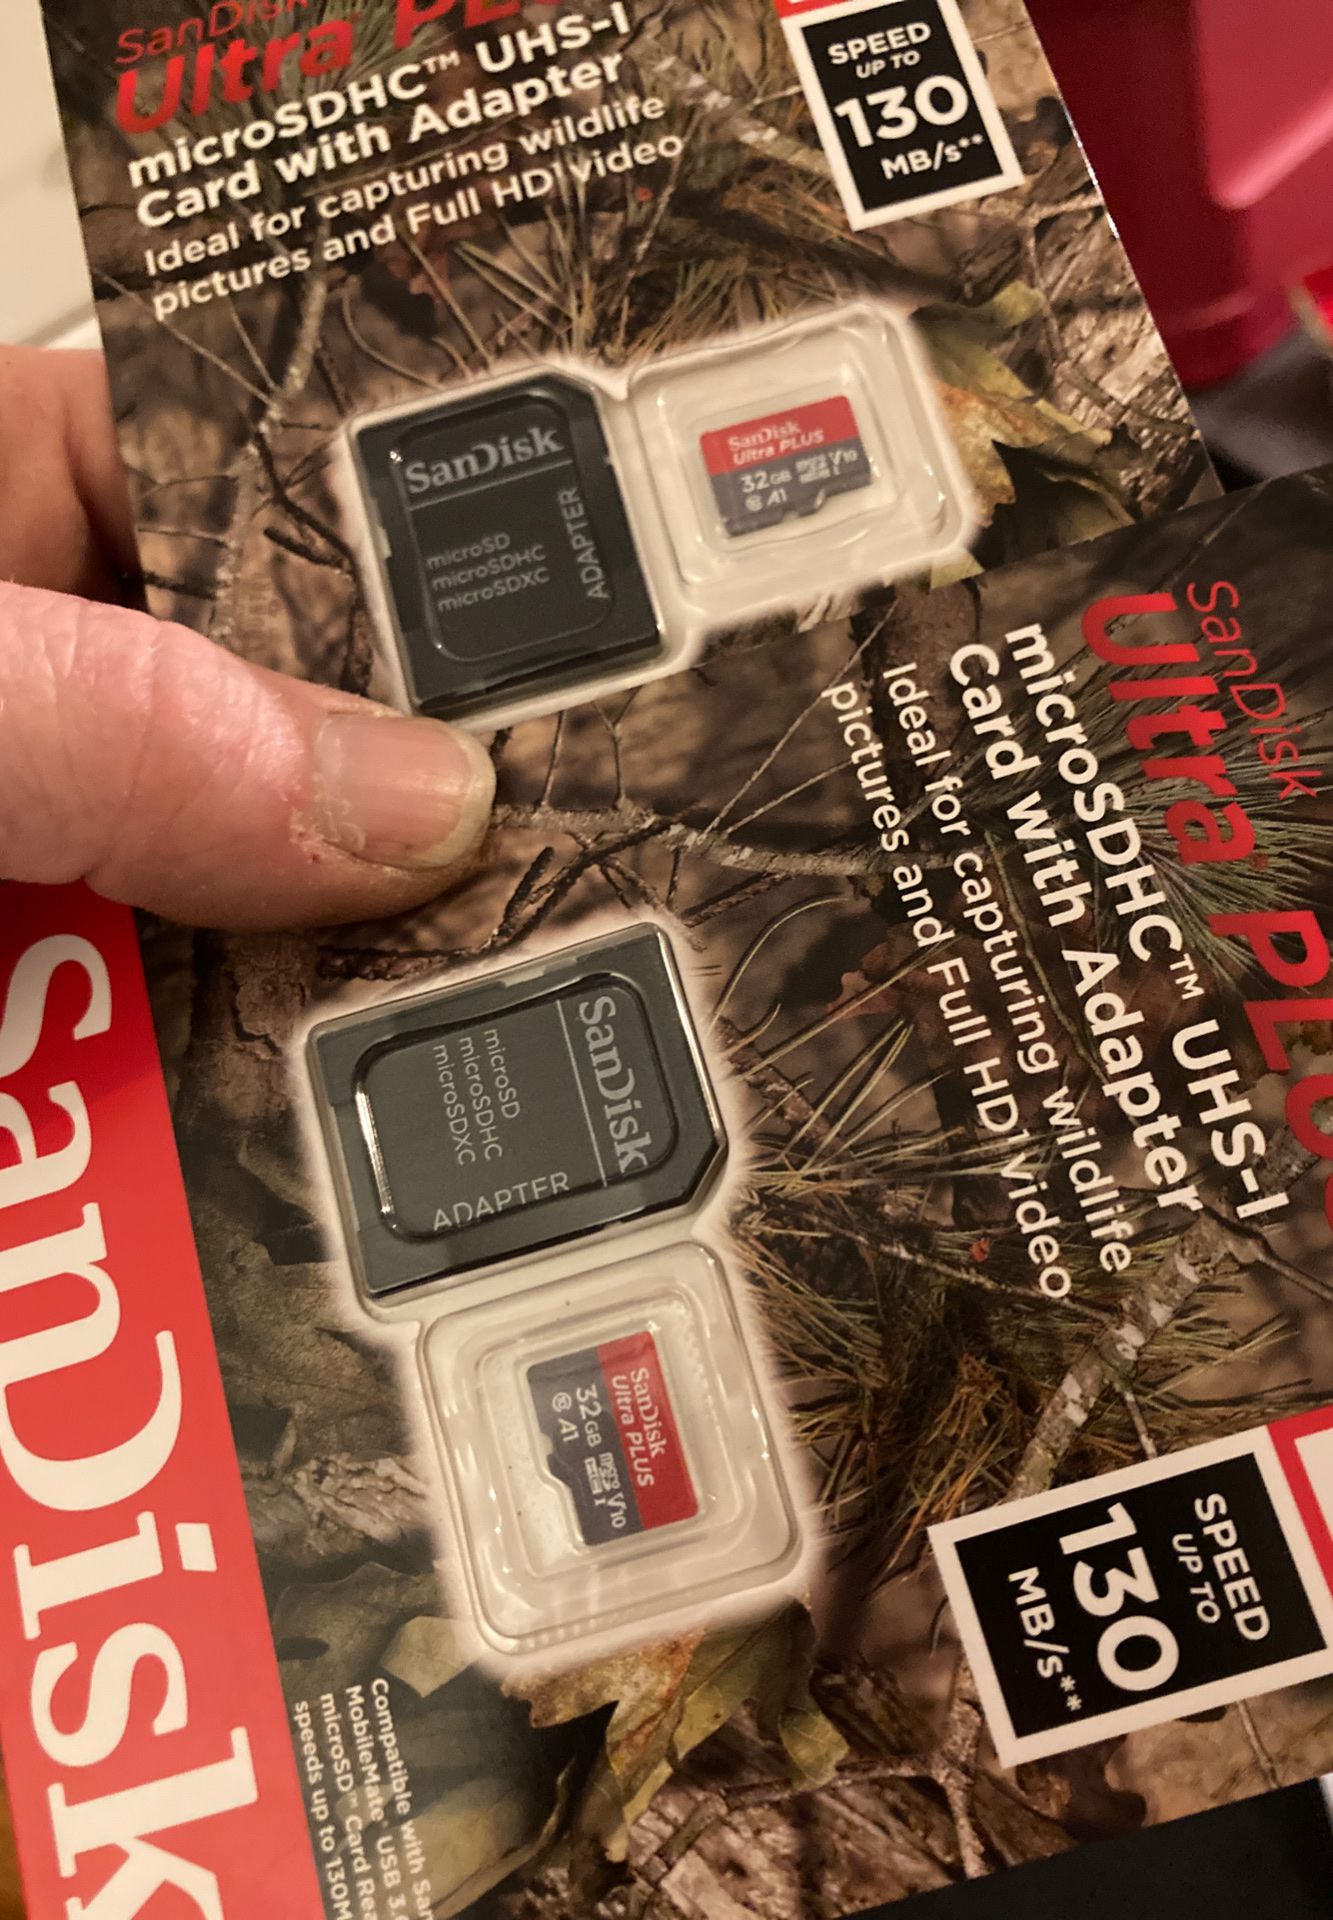 Micro SD imaging cards